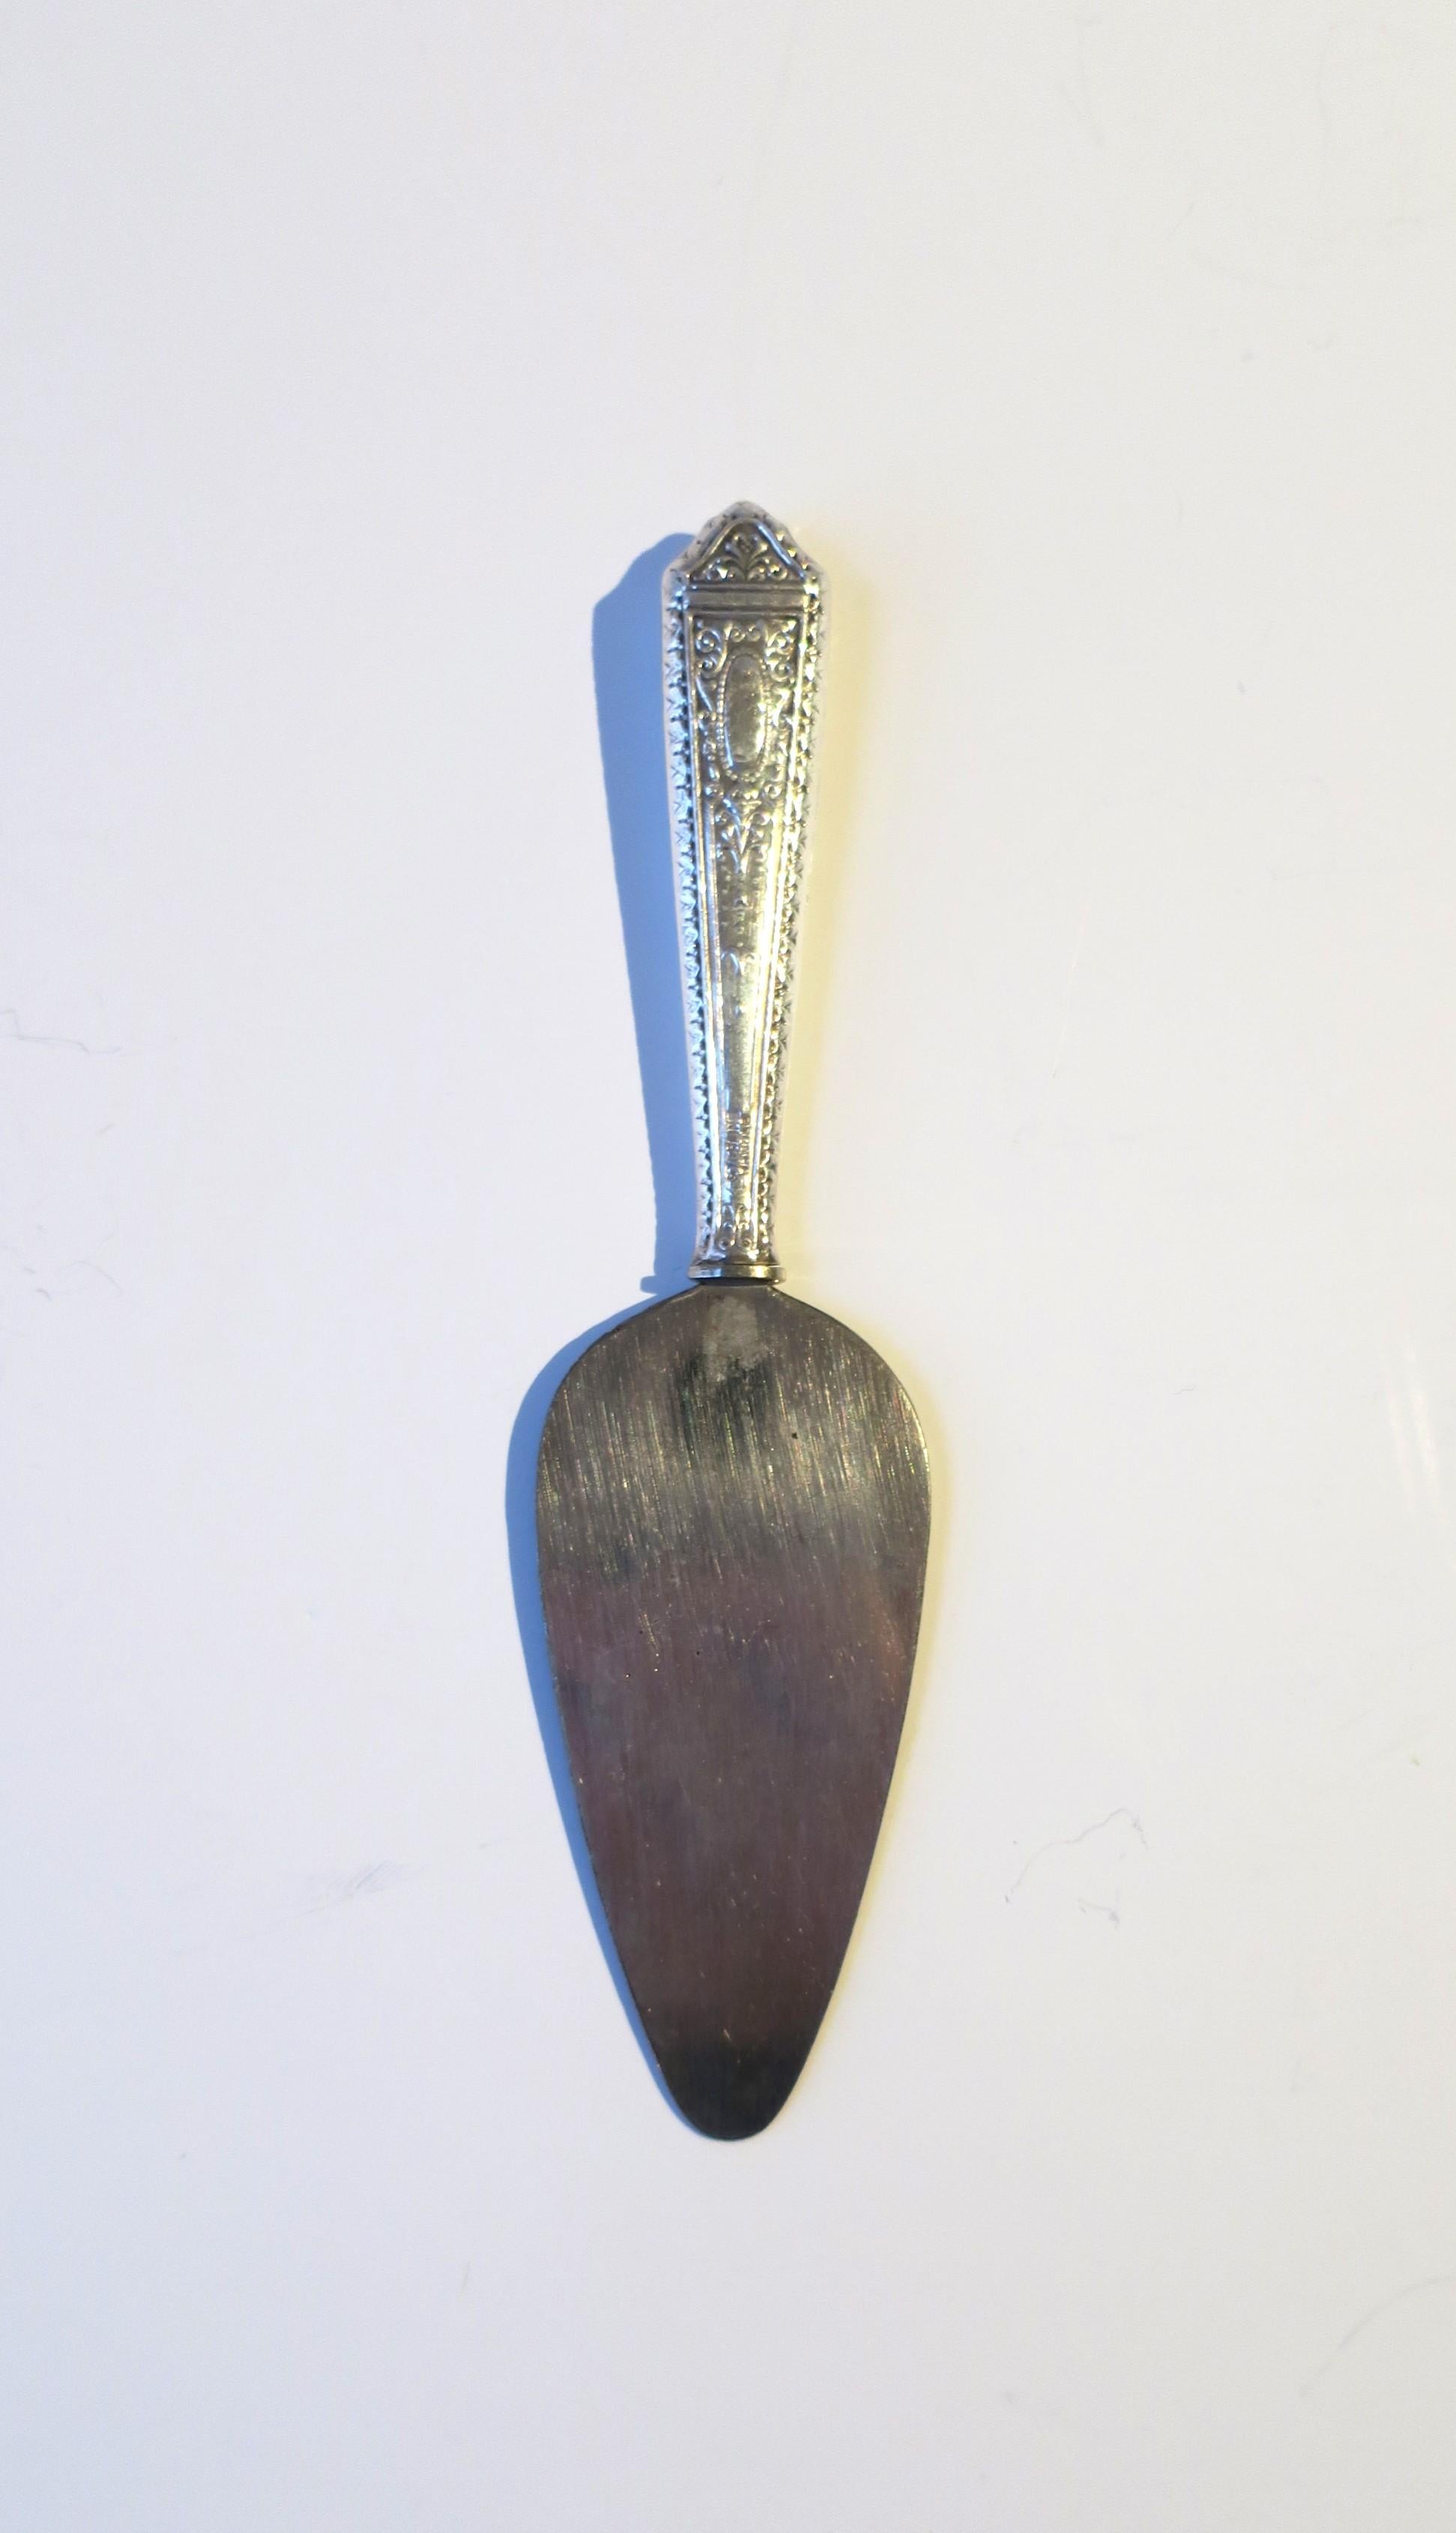 A sterling silver appetizer spreader, circa early-20th century. Pieces' sterling silver handle has a repousse design of beads and scrolls, spreader/spatula in stainless steel. Handle is marked, on both sides. 'Sterling', 'Handle', shown in closeup